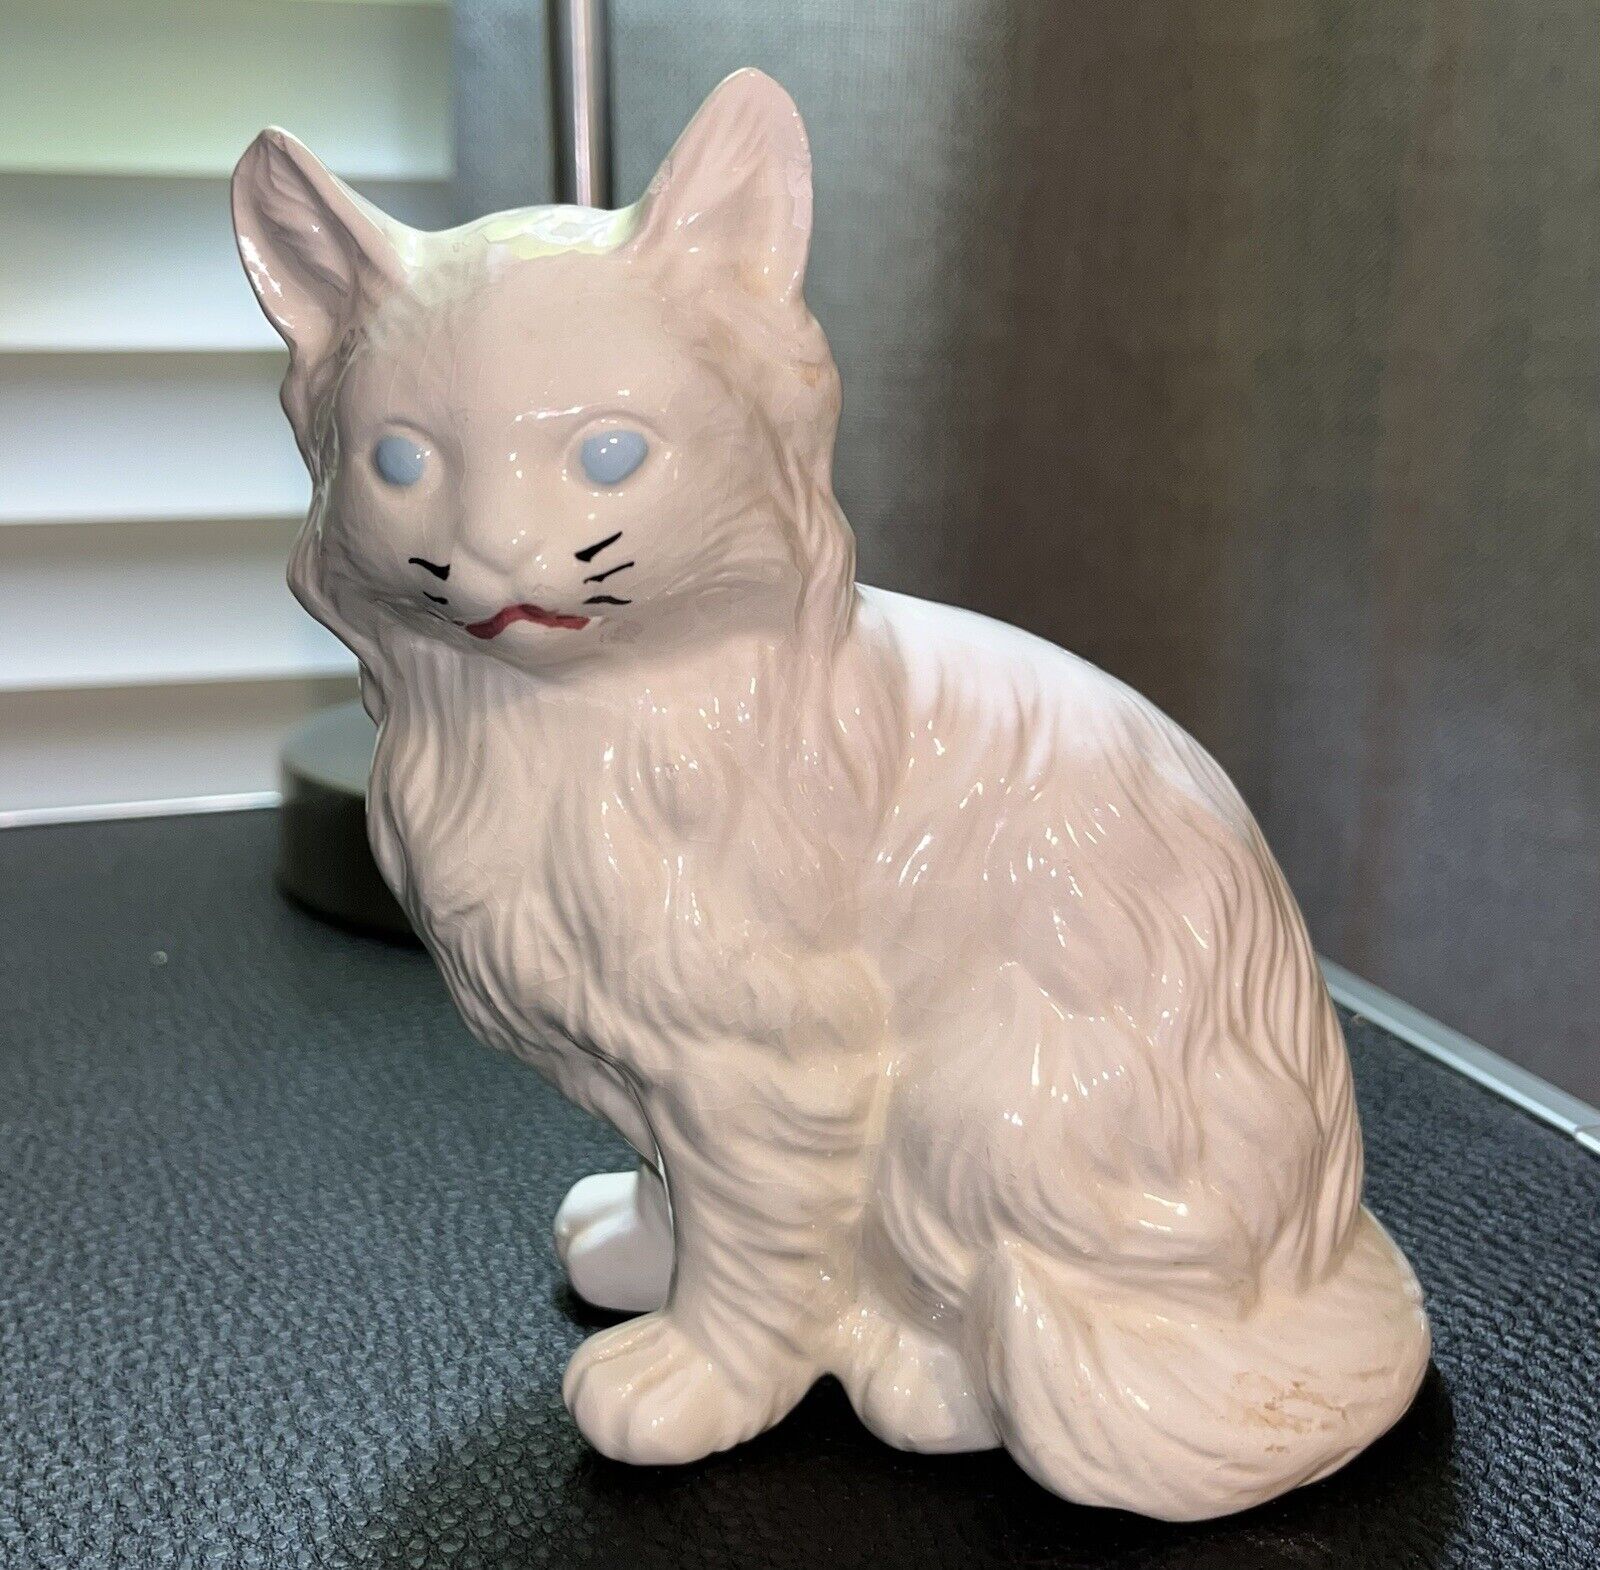 VTG 1969 Ceramic Kitty Cat Hand Painted White Blue Eyes Signed By the Artist